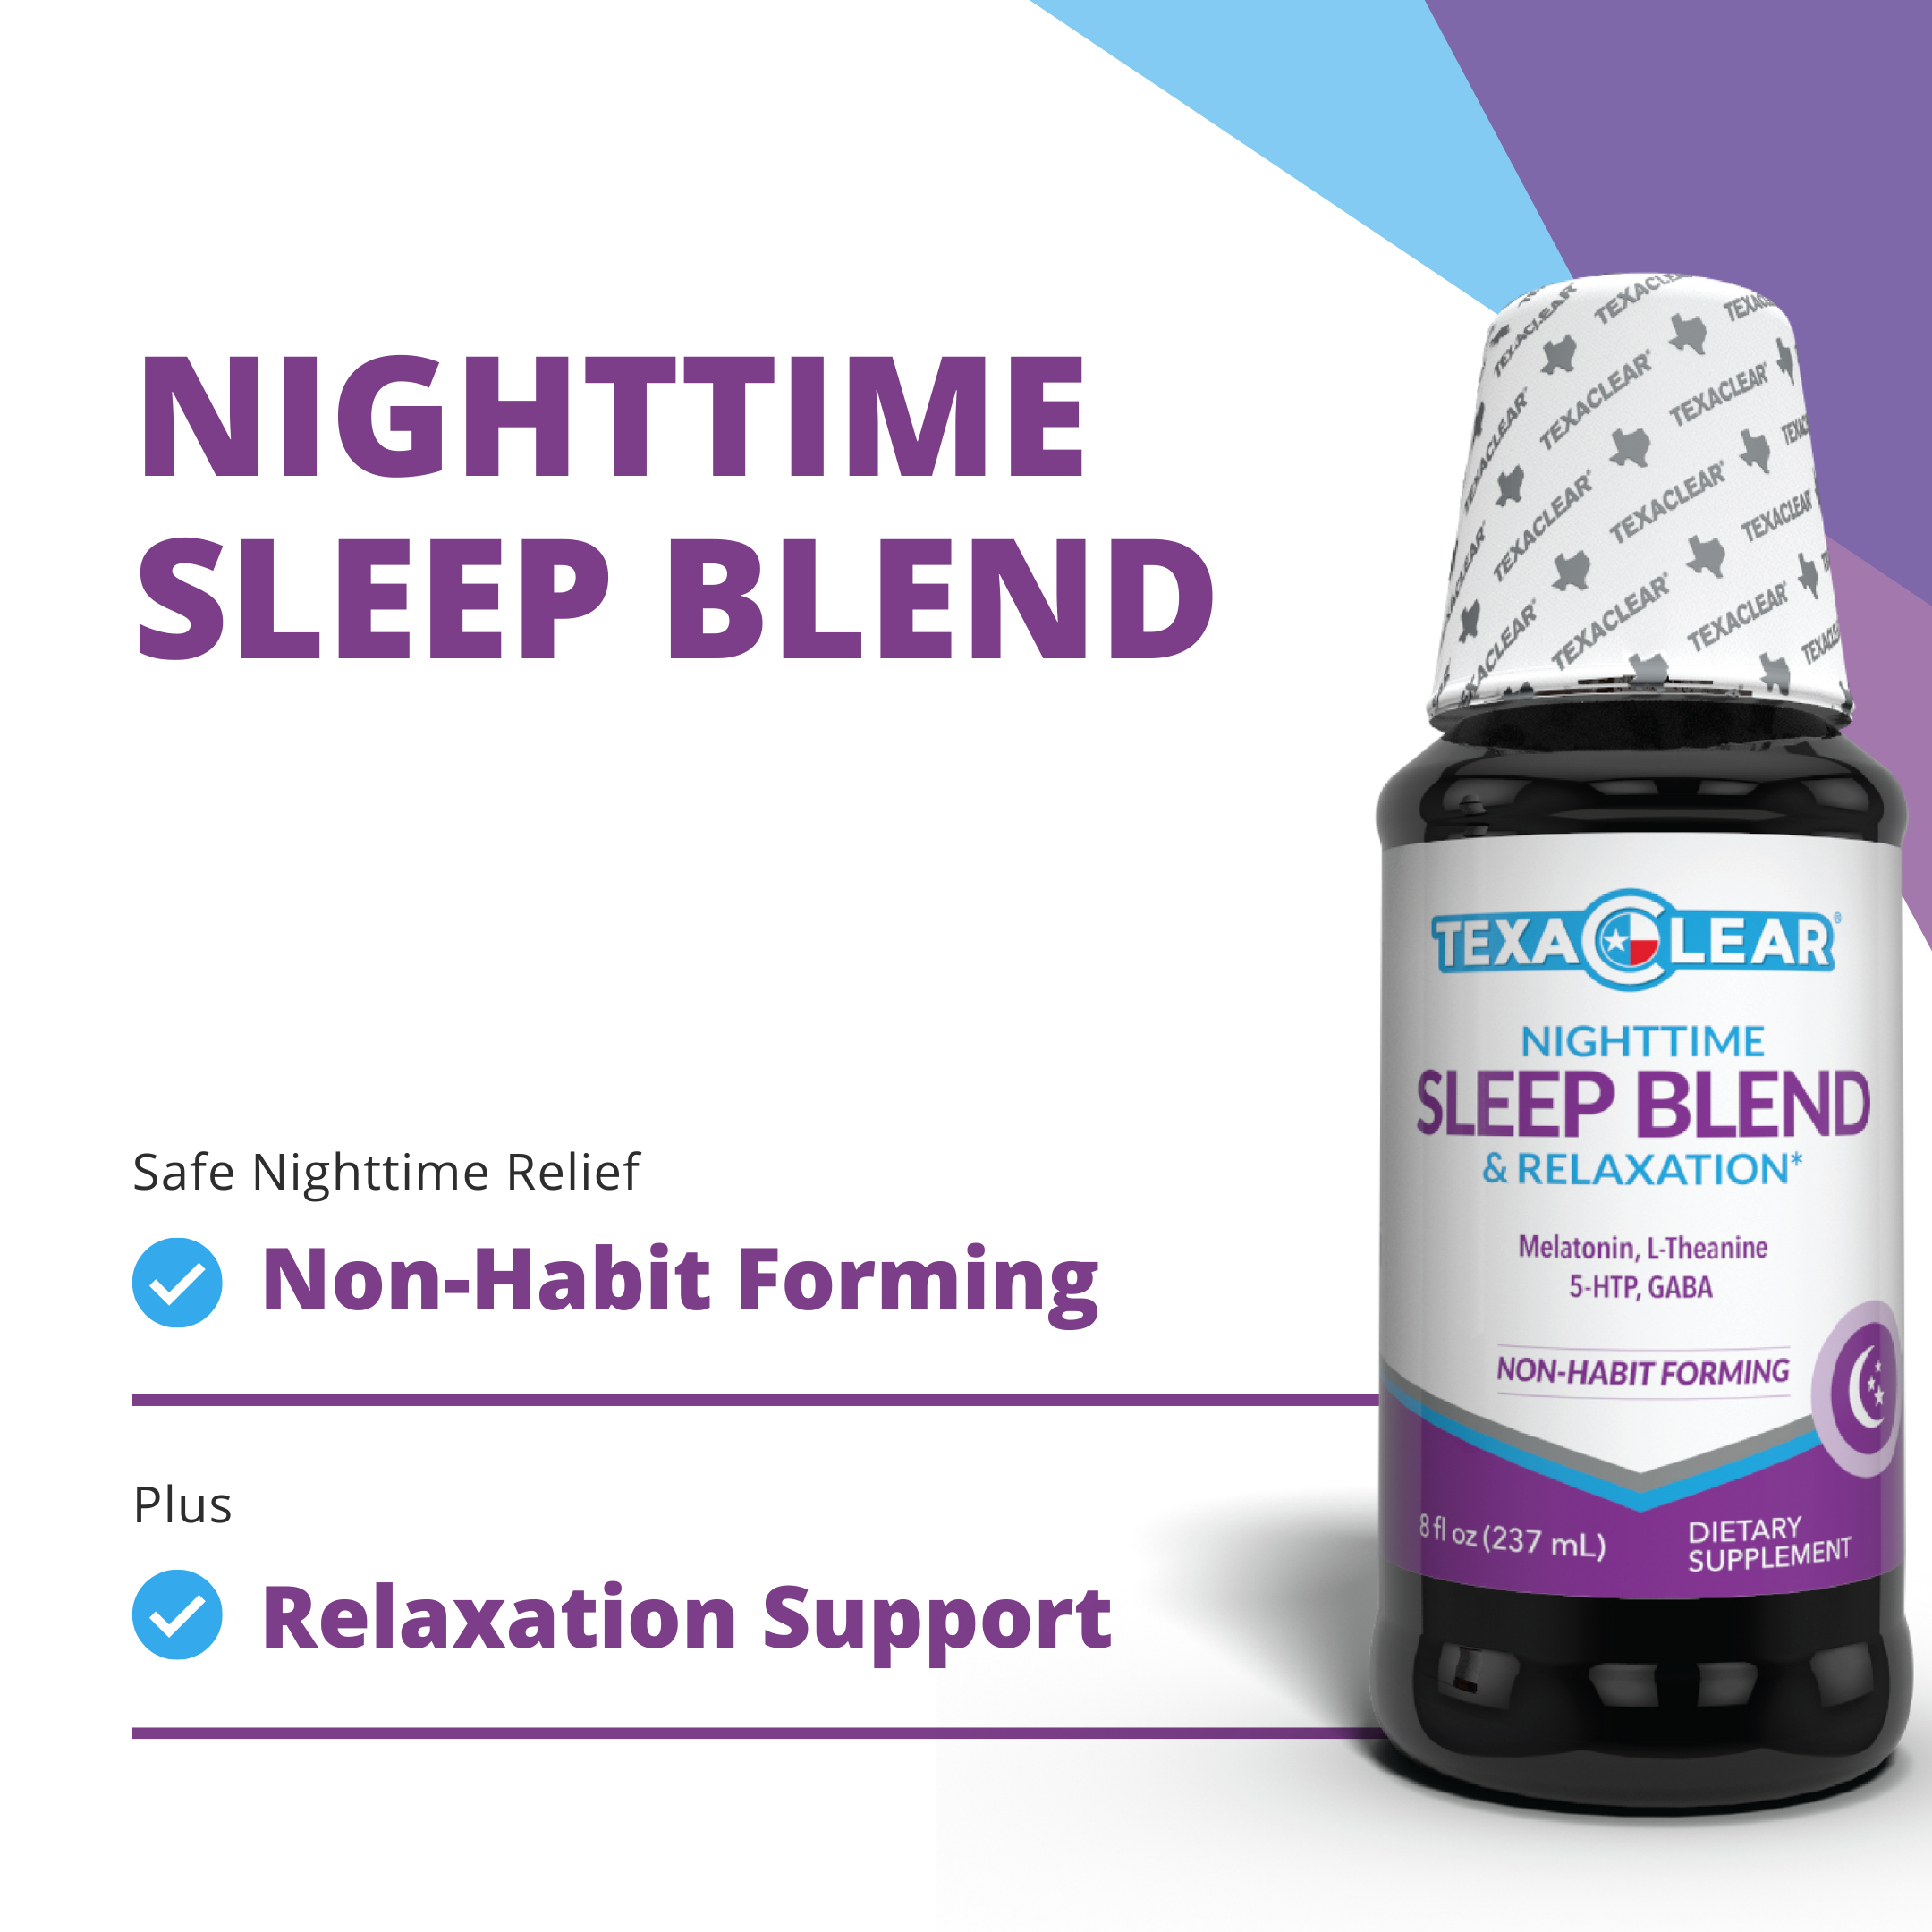 TexaClear® Sleep Blend and Relaxation Support